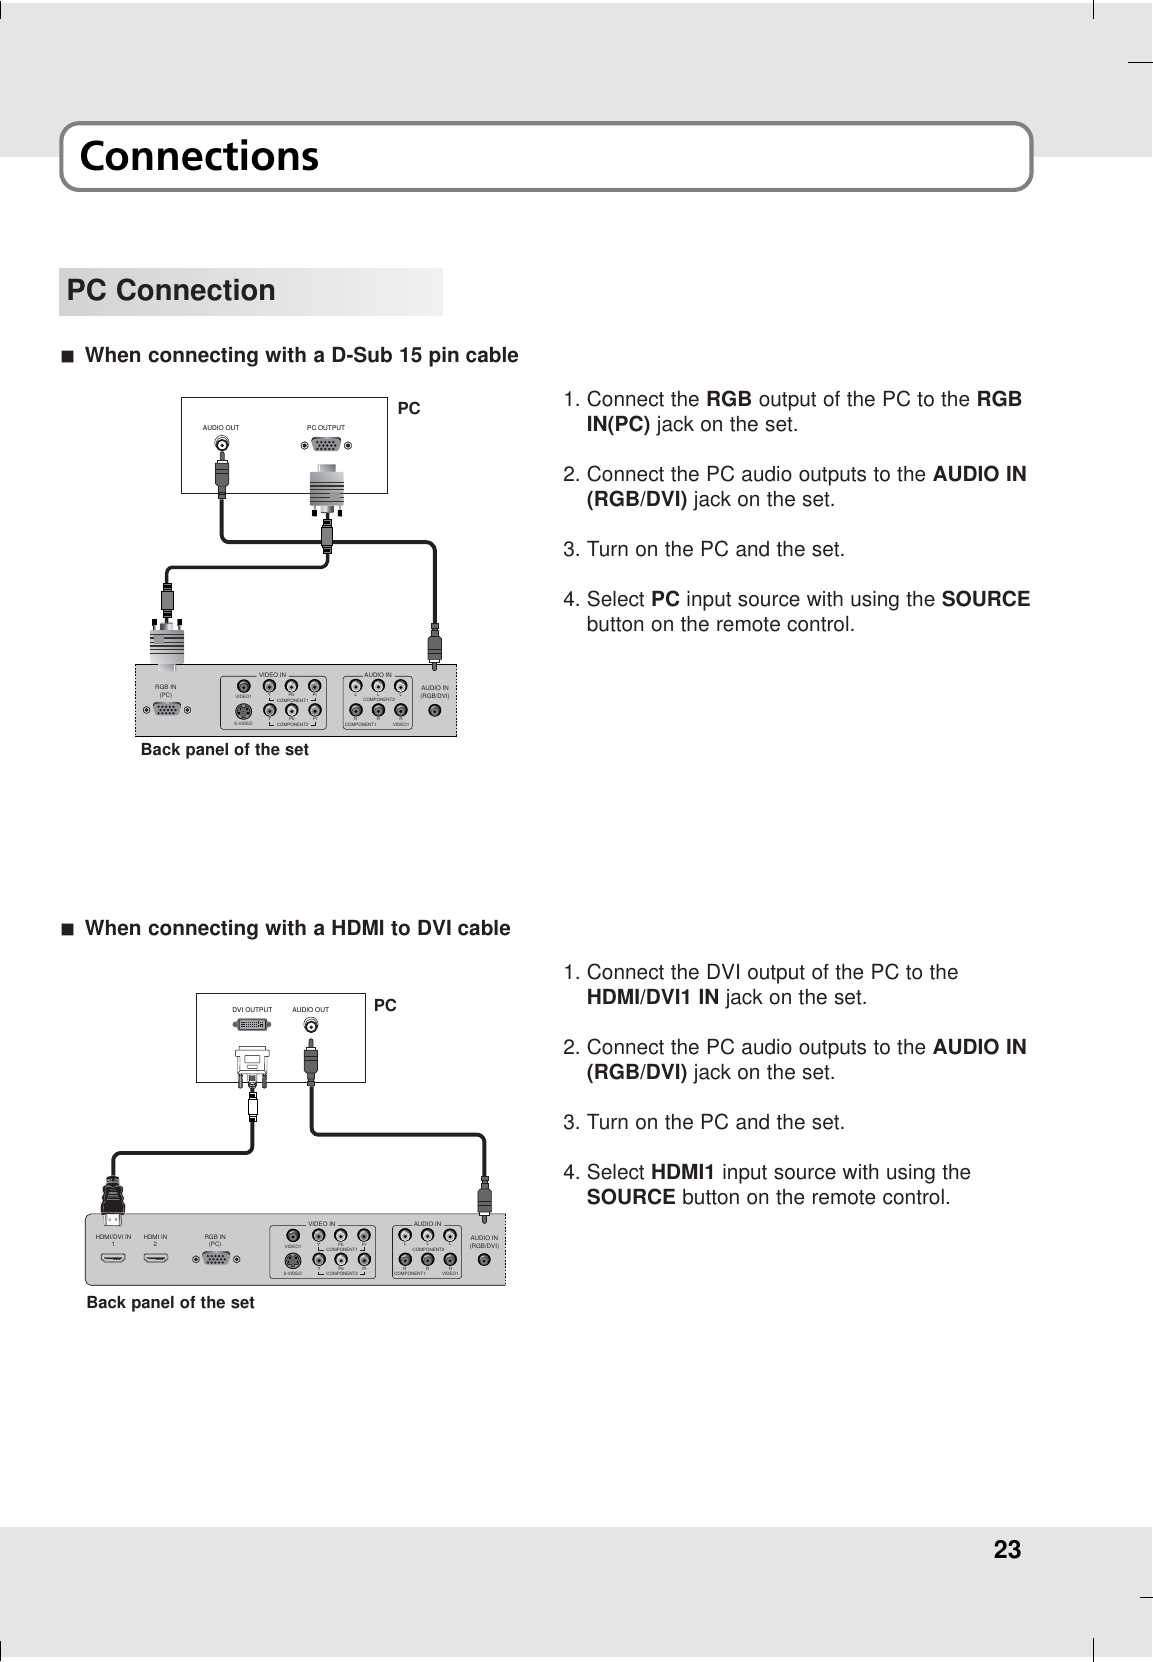 23ConnectionsPC ConnectionDVI OUTPUT AUDIO OUTHDMI IN2HDMI/DVI IN1RGB IN(PC) AUDIO IN(RGB/DVI)COMPONENT2YPbPrYPbPrVIDEO INVIDEO1S-VIDEOCOMPONENT1L LR RCOMPONENT2VIDEO1RLAUDIO INCOMPONENT11. Connect the DVI output of the PC to theHDMI/DVI1 IN jack on the set.2. Connect the PC audio outputs to the AUDIO IN(RGB/DVI) jack on the set.3. Turn on the PC and the set.4. Select HDMI1 input source with using theSOURCE button on the remote control.AWhen connecting with a HDMI to DVI cableAUDIO OUT PC OUTPUTRGB IN(PC) AUDIO IN(RGB/DVI)COMPONENT2YPbPrYPbPrVIDEO INVIDEO1S-VIDEOCOMPONENT1L LR RCOMPONENT2VIDEO1RLAUDIO INCOMPONENT11. Connect the RGB output of the PC to the RGBIN(PC) jack on the set.2. Connect the PC audio outputs to the AUDIO IN(RGB/DVI) jack on the set.3. Turn on the PC and the set.4. Select PC input source with using the SOURCEbutton on the remote control.AWhen connecting with a D-Sub 15 pin cablePCBack panel of the setPCBack panel of the set